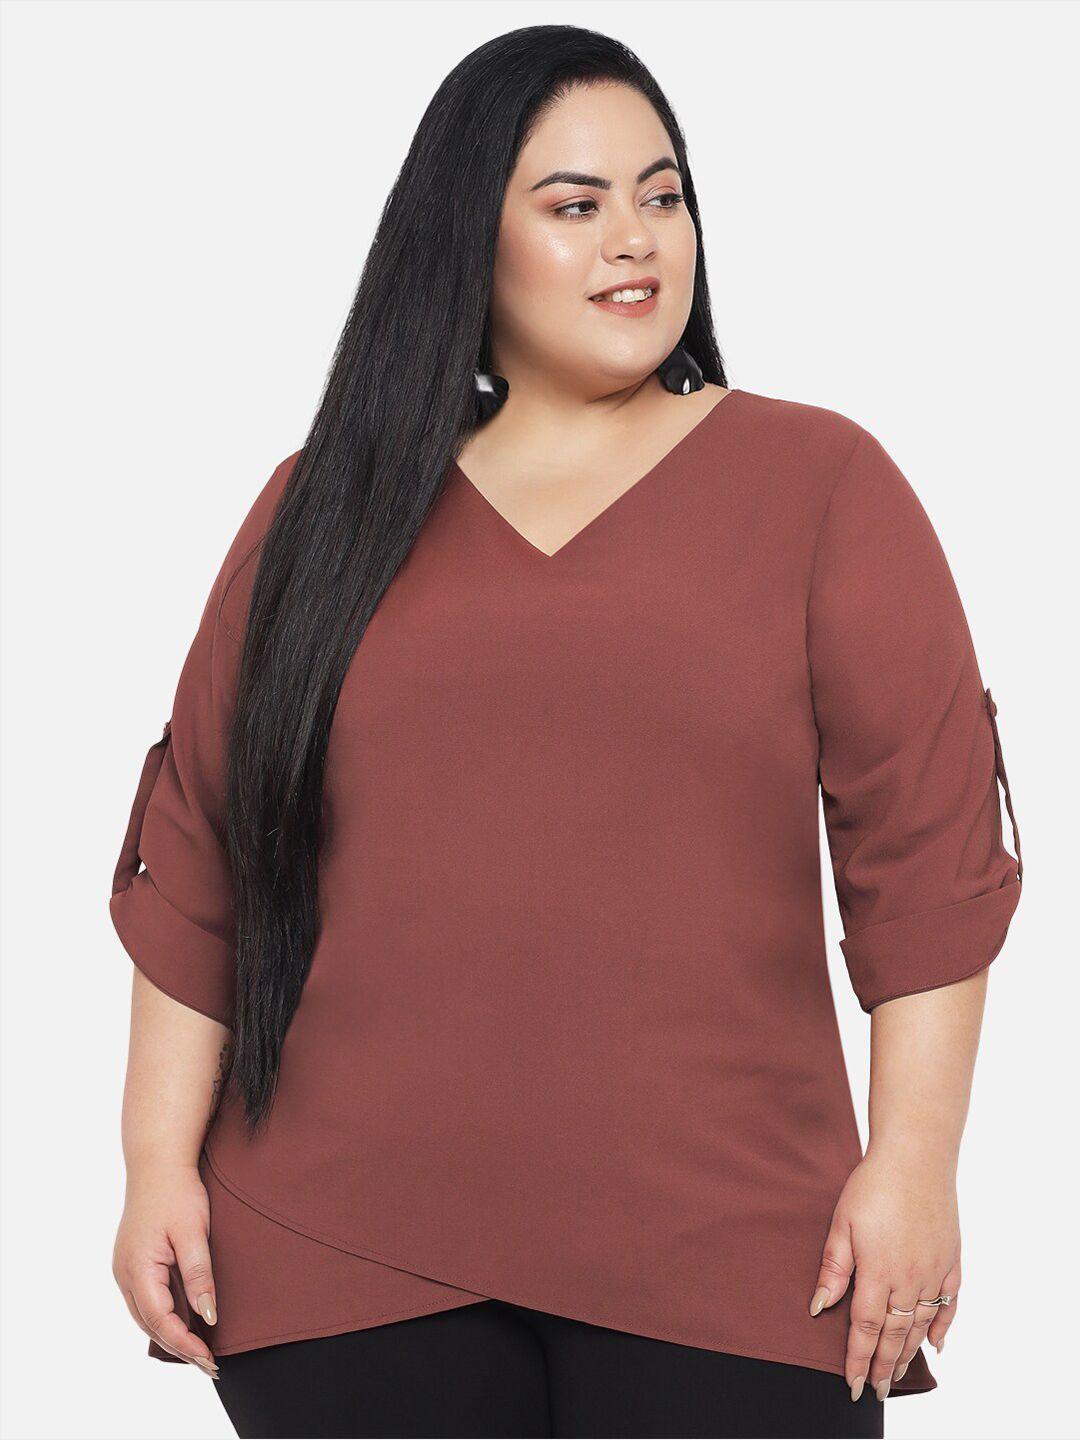 wild u plus size women pink roll-up sleeves layered georgette top